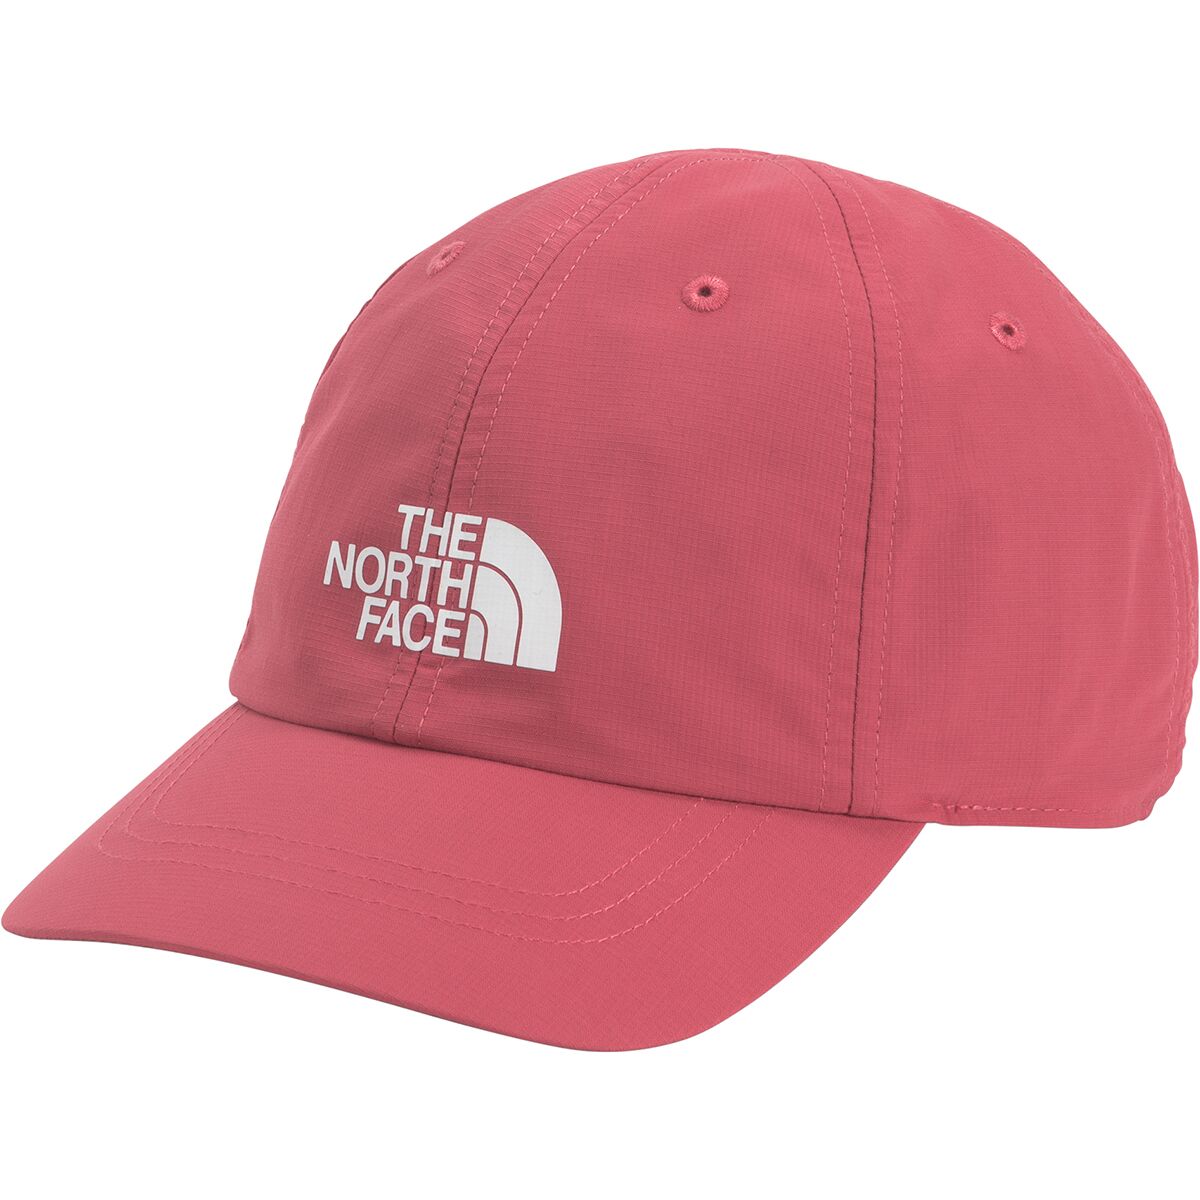 The North Face Horizon Hat - Kids'